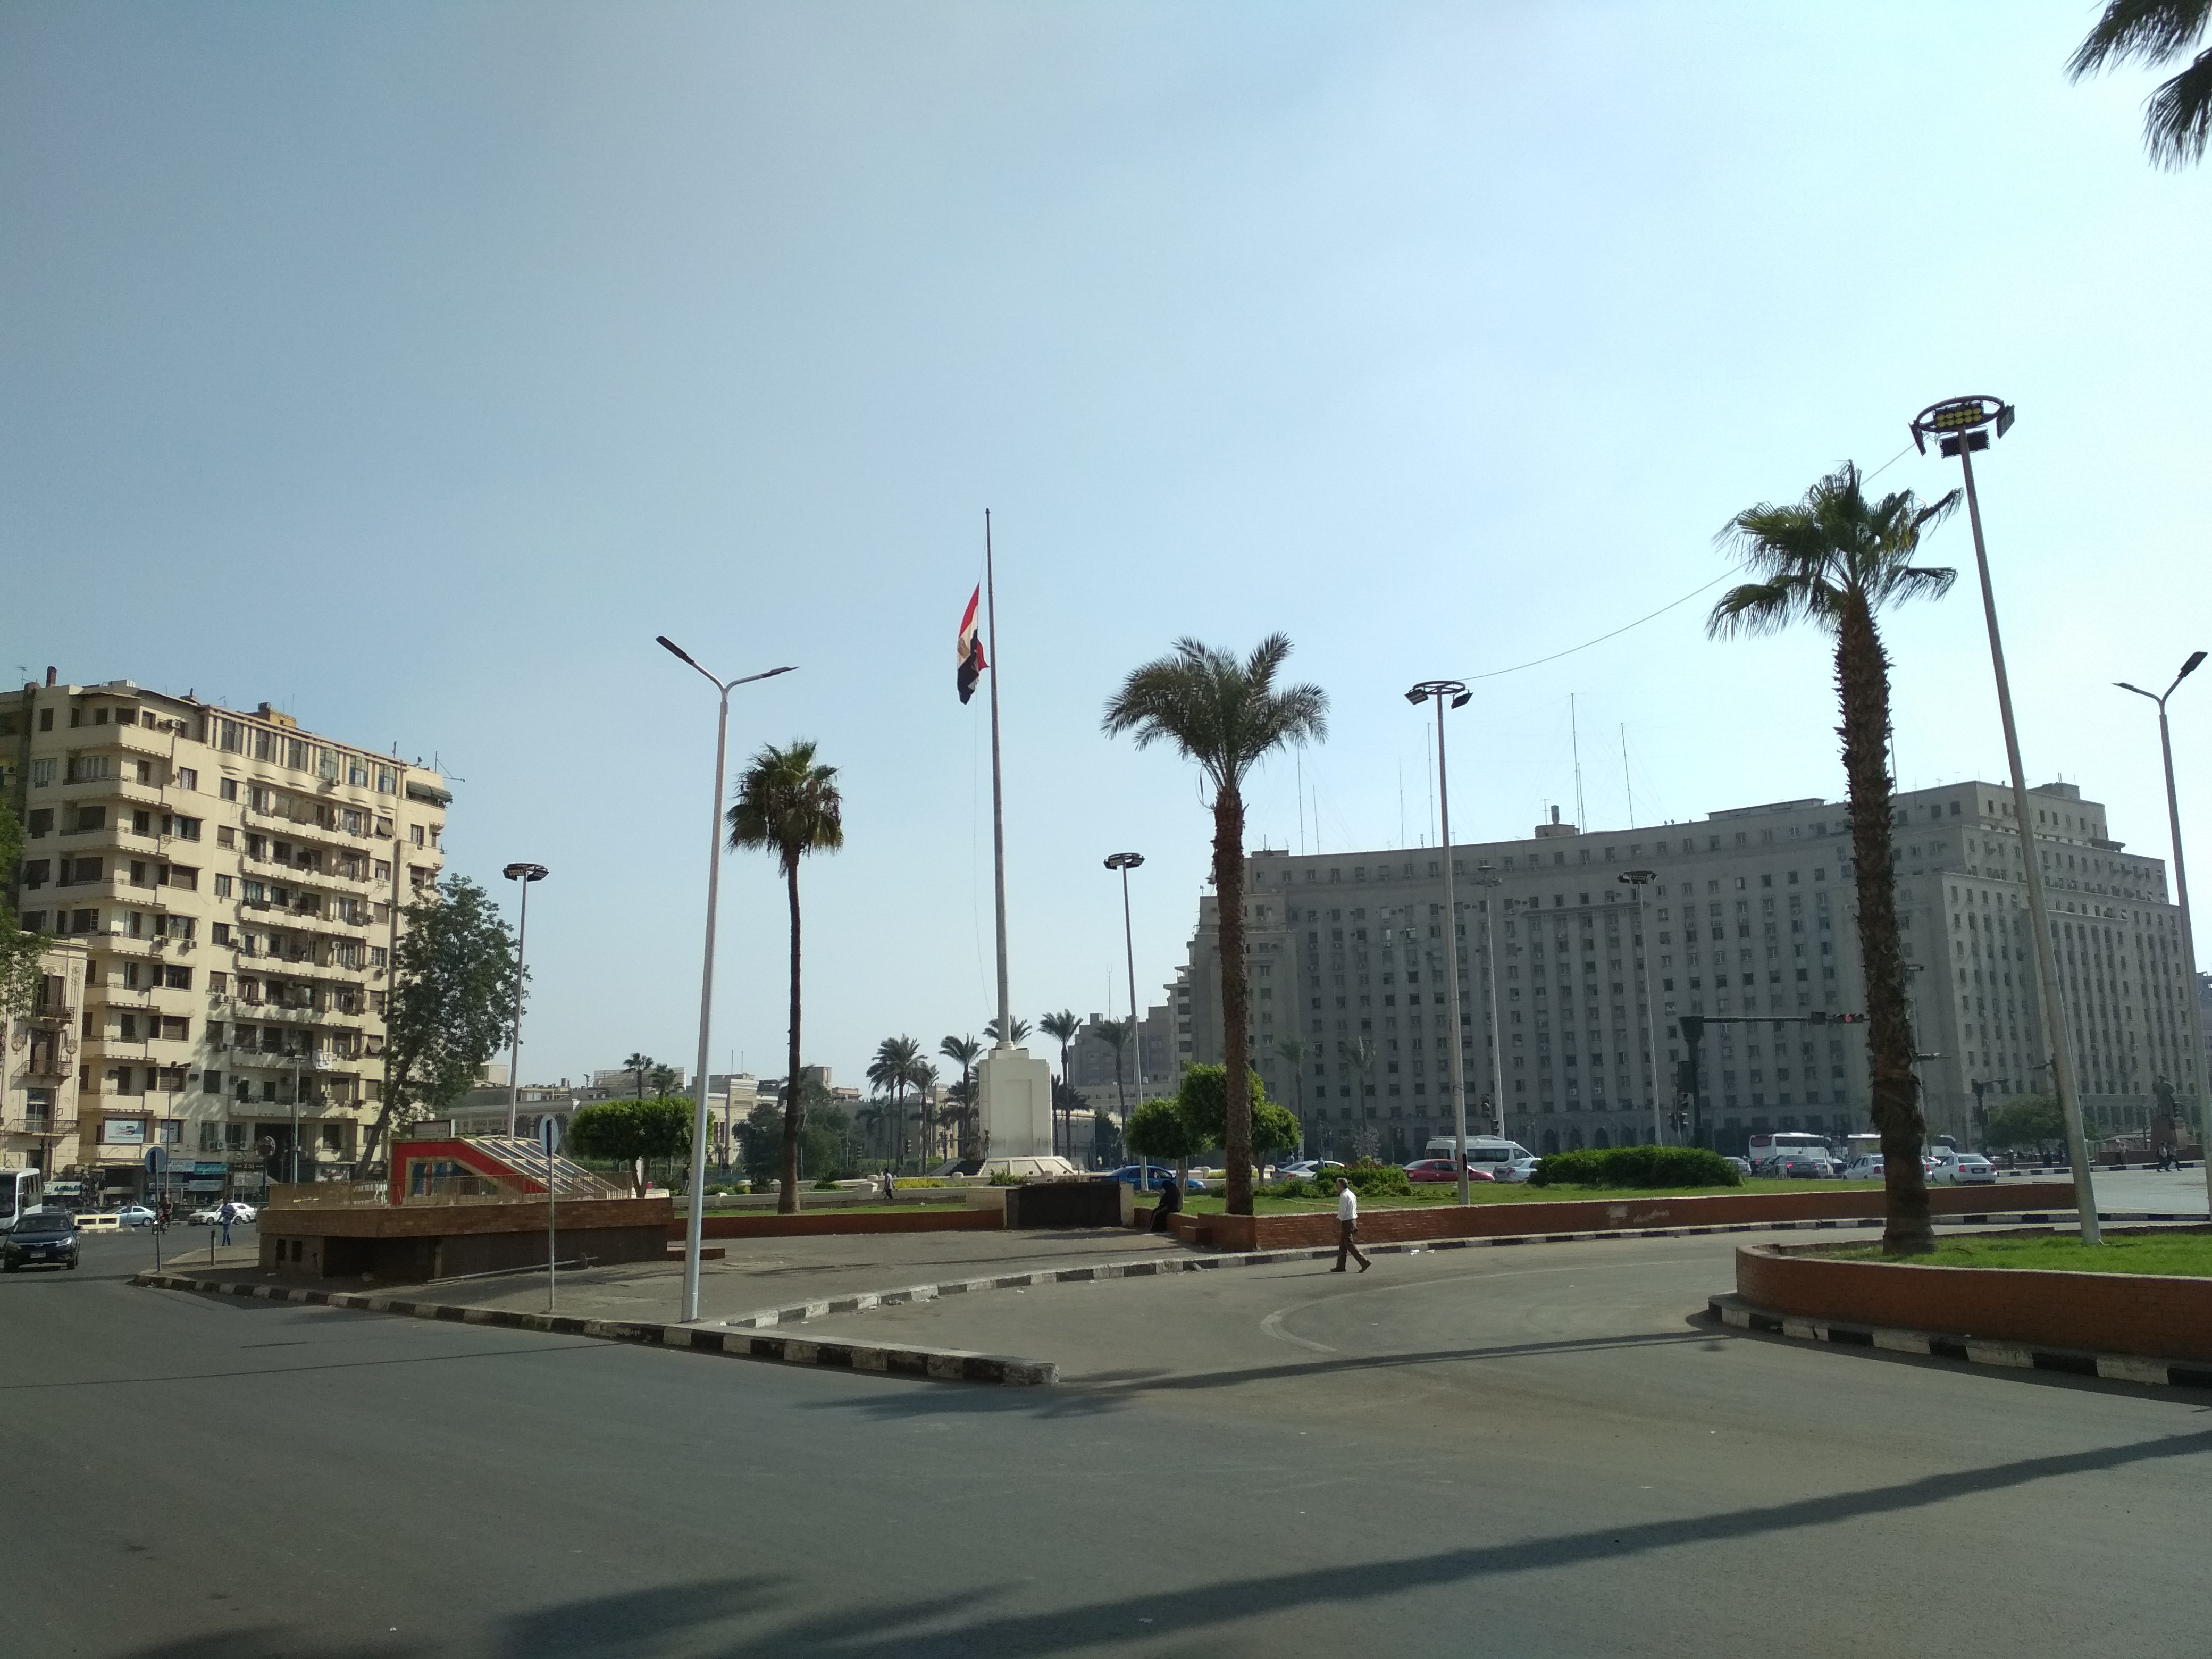  In tourist spots such as Tahrir Square, everyone is suspect